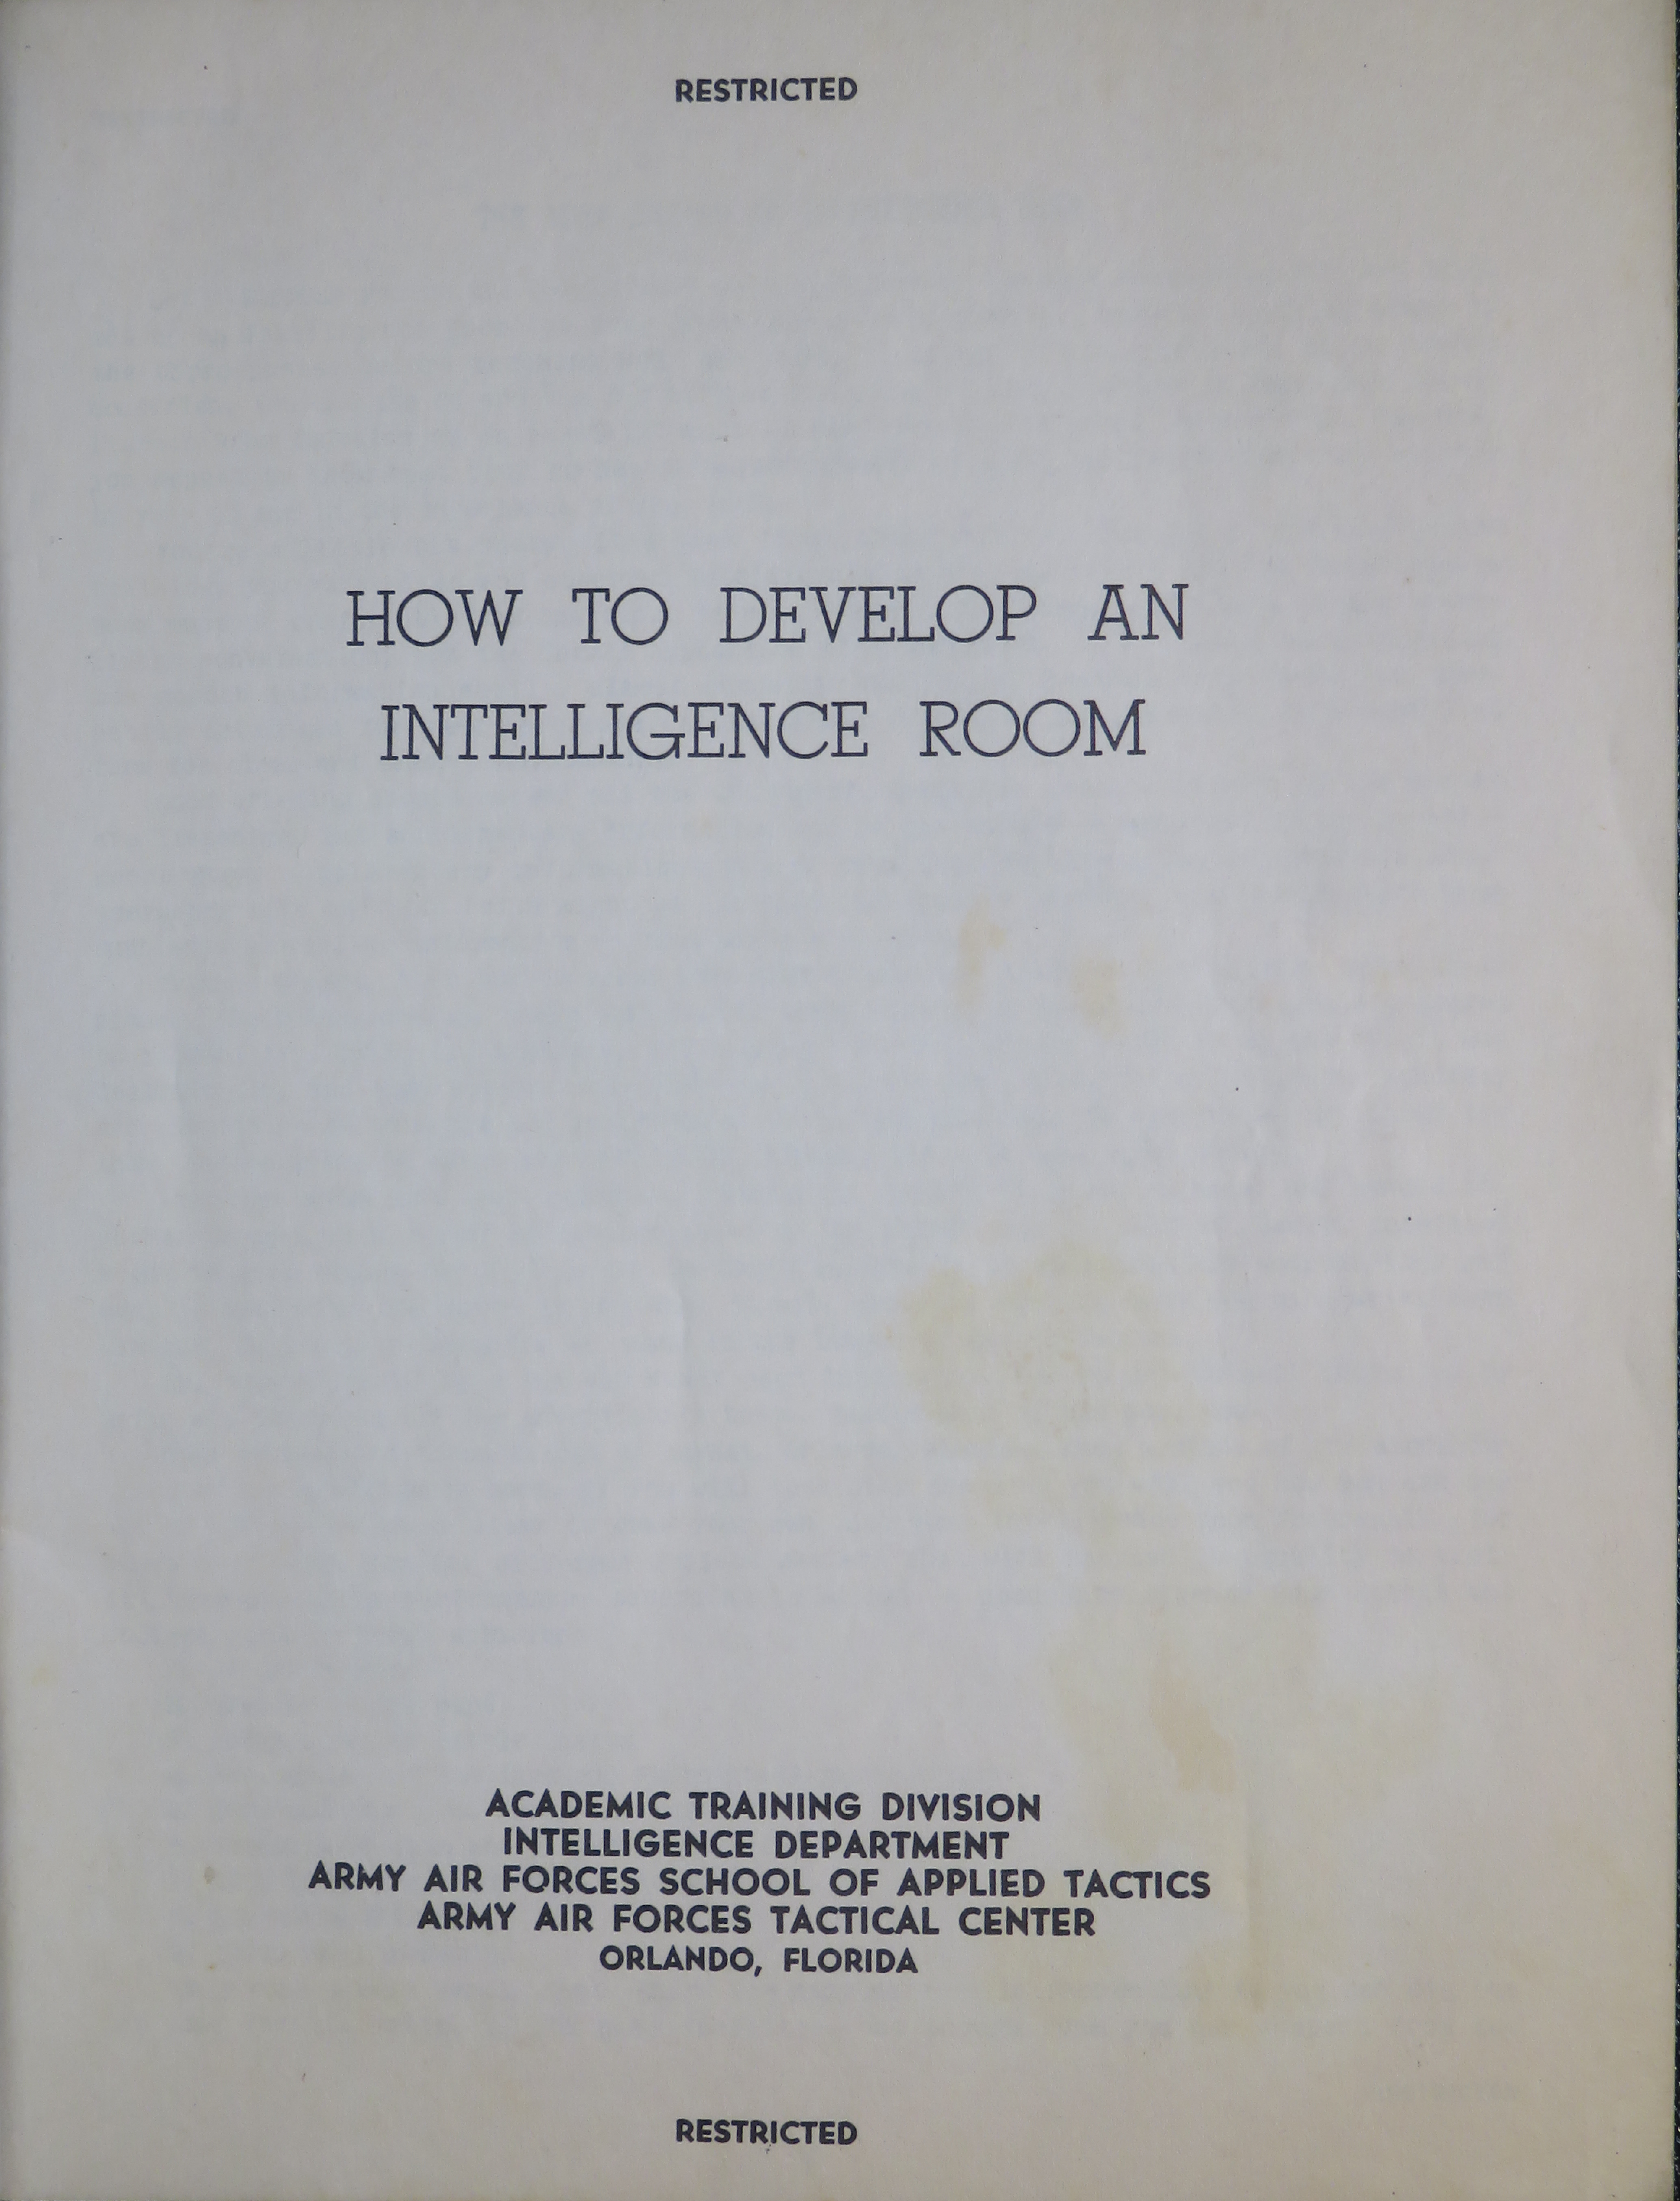 Sample page 3 from AirCorps Library document: How to Develop an Intelligence room